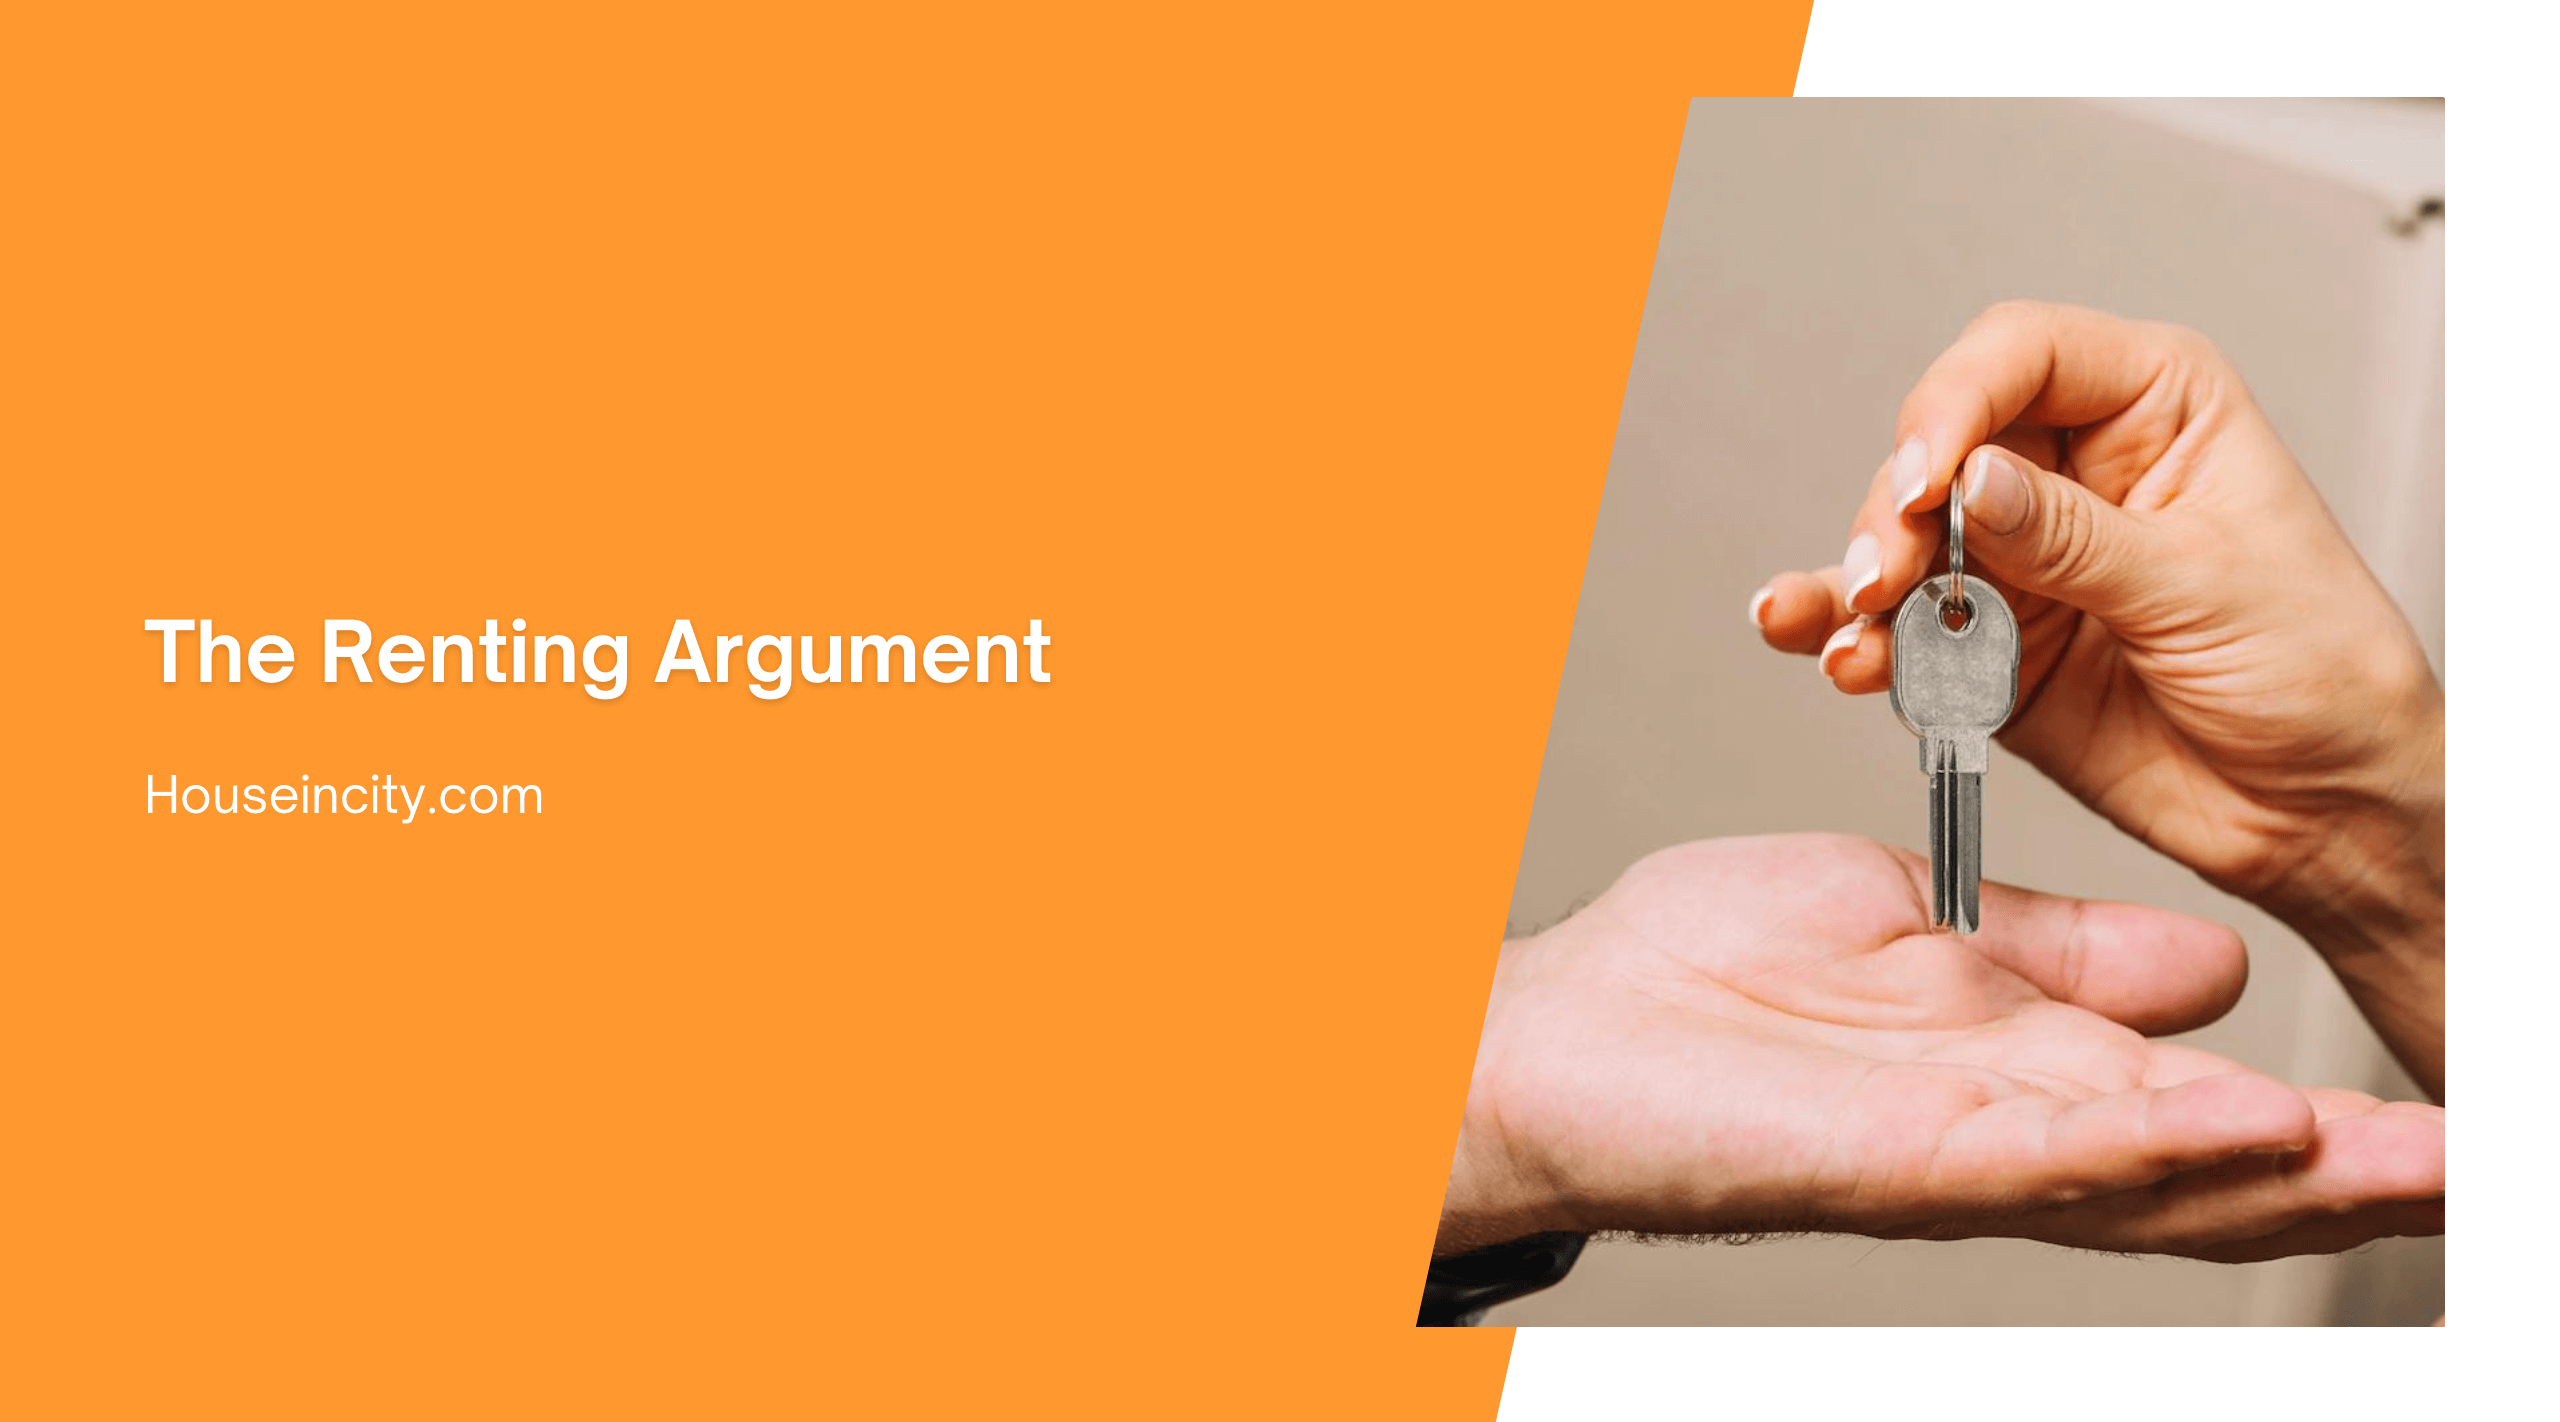 The Renting Argument